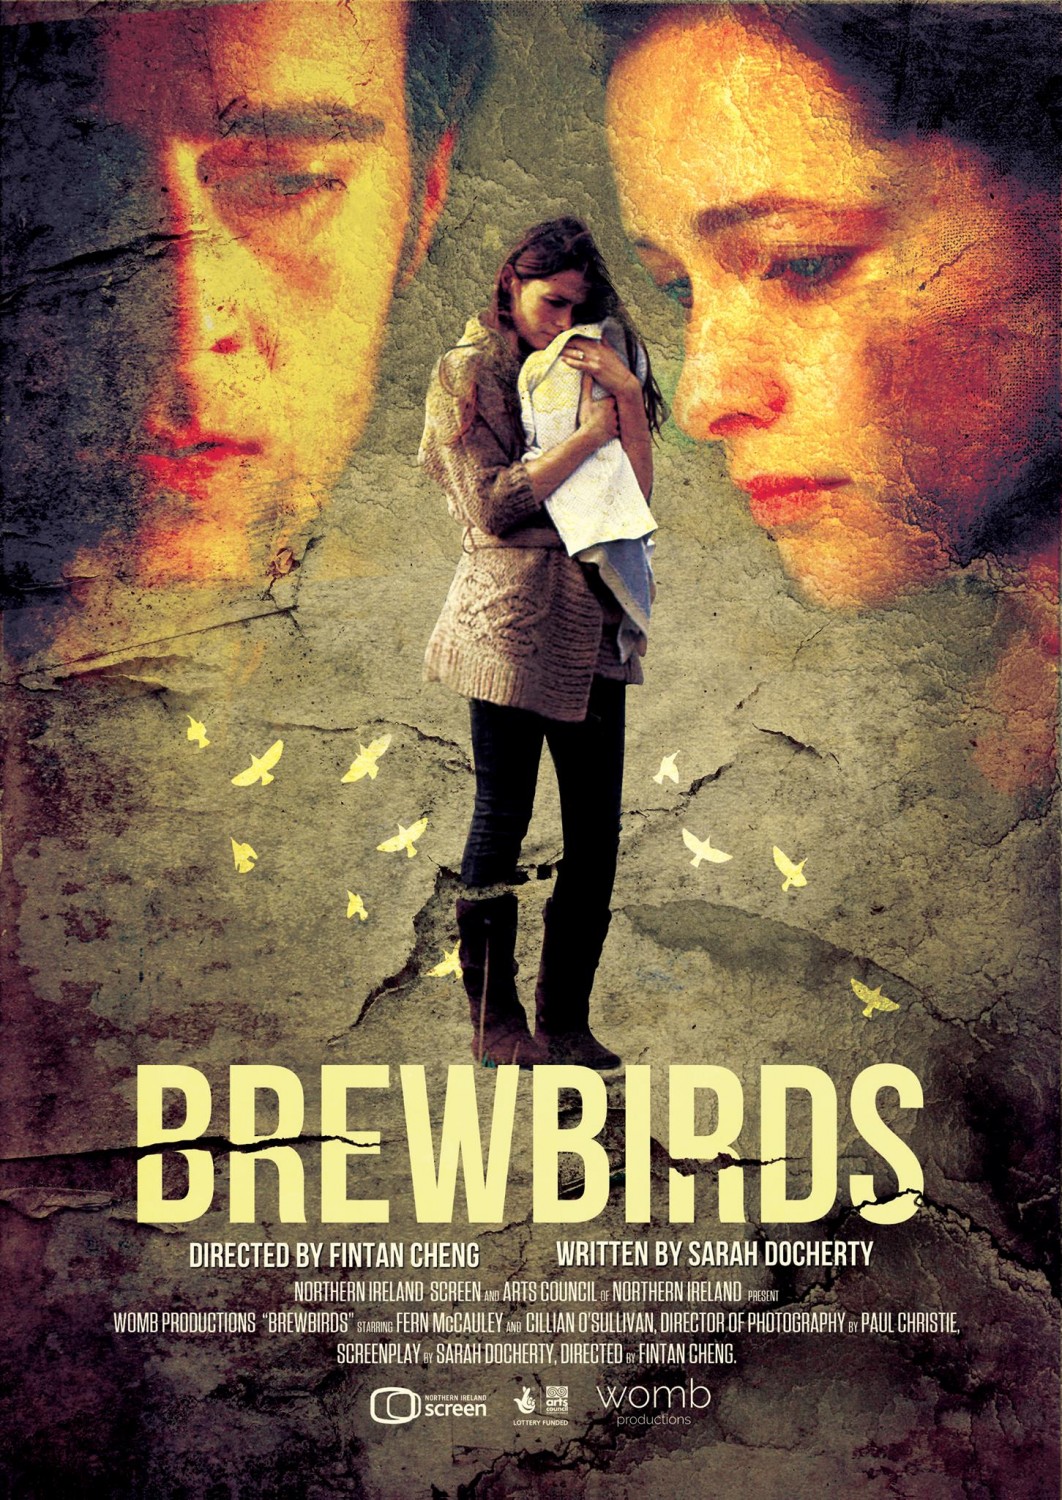 Extra Large Movie Poster Image for Brewbirds